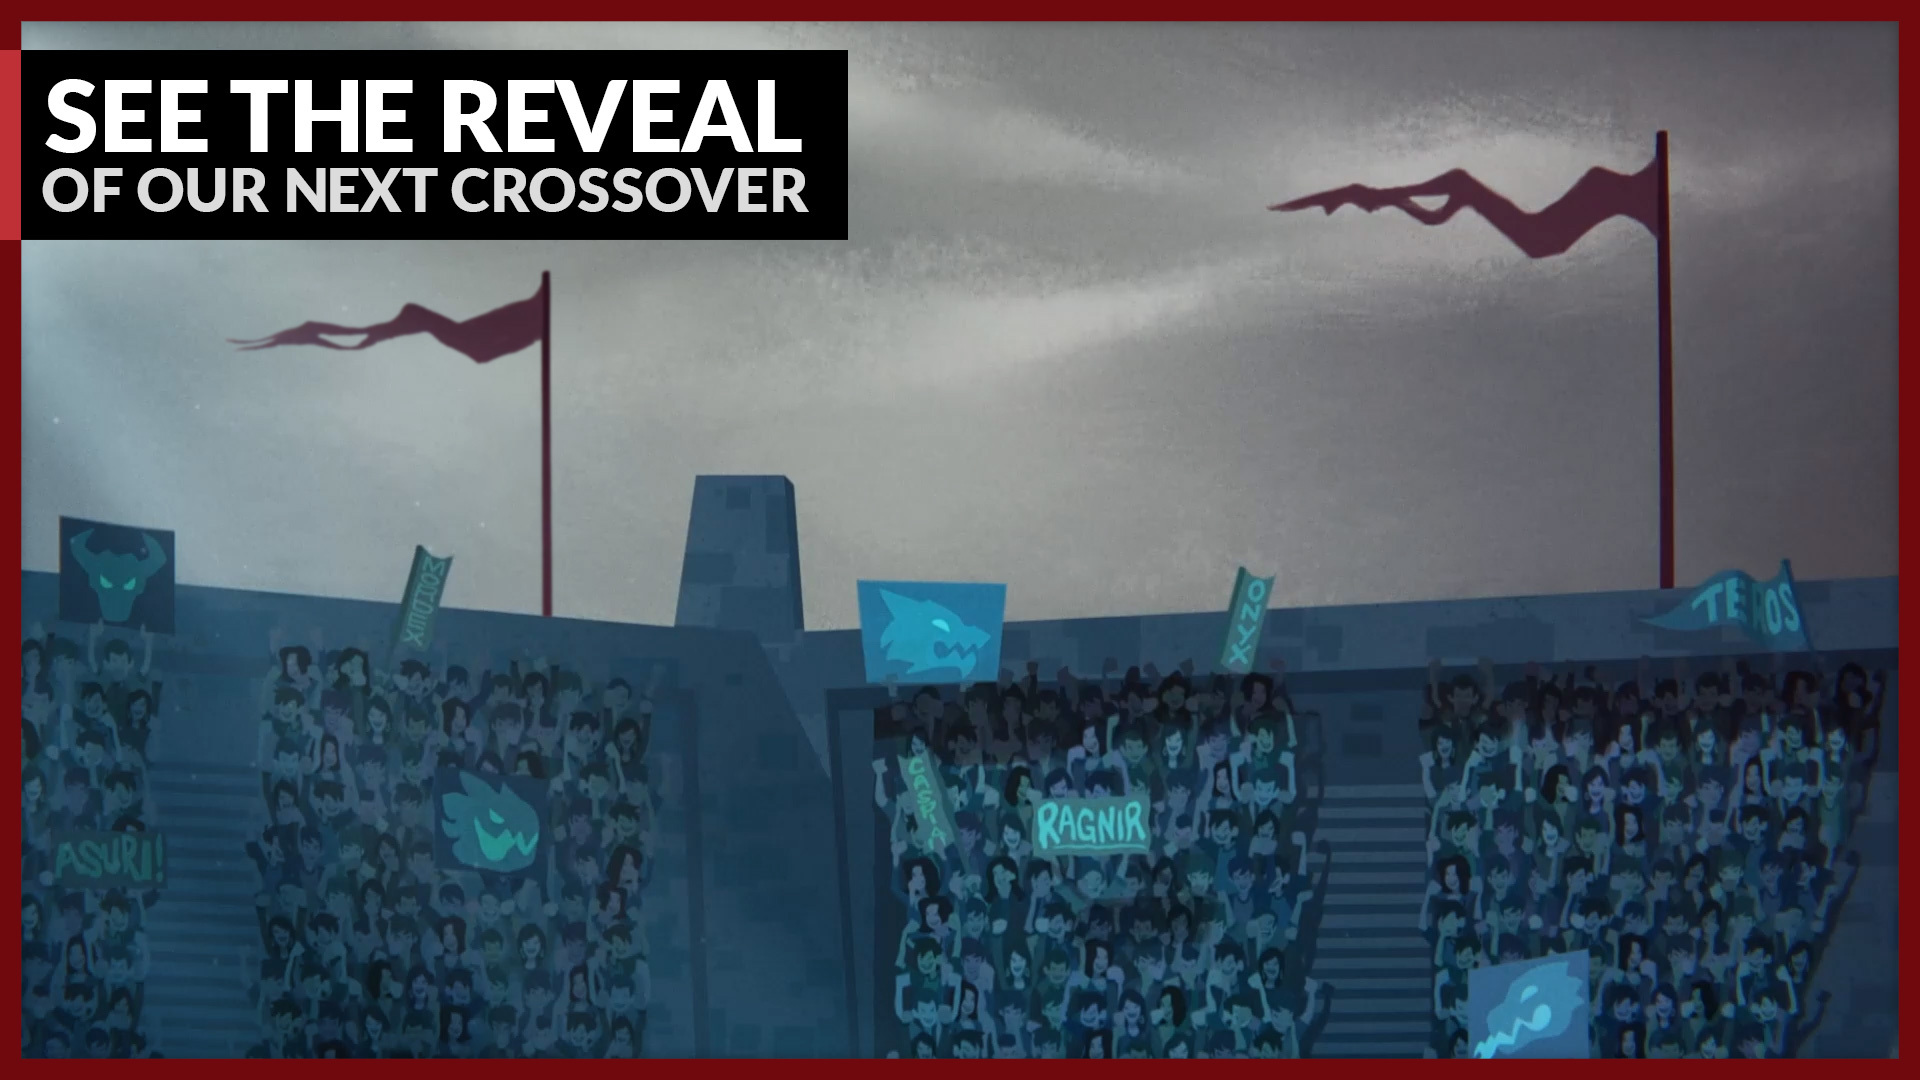 The next Crossover is on its way!